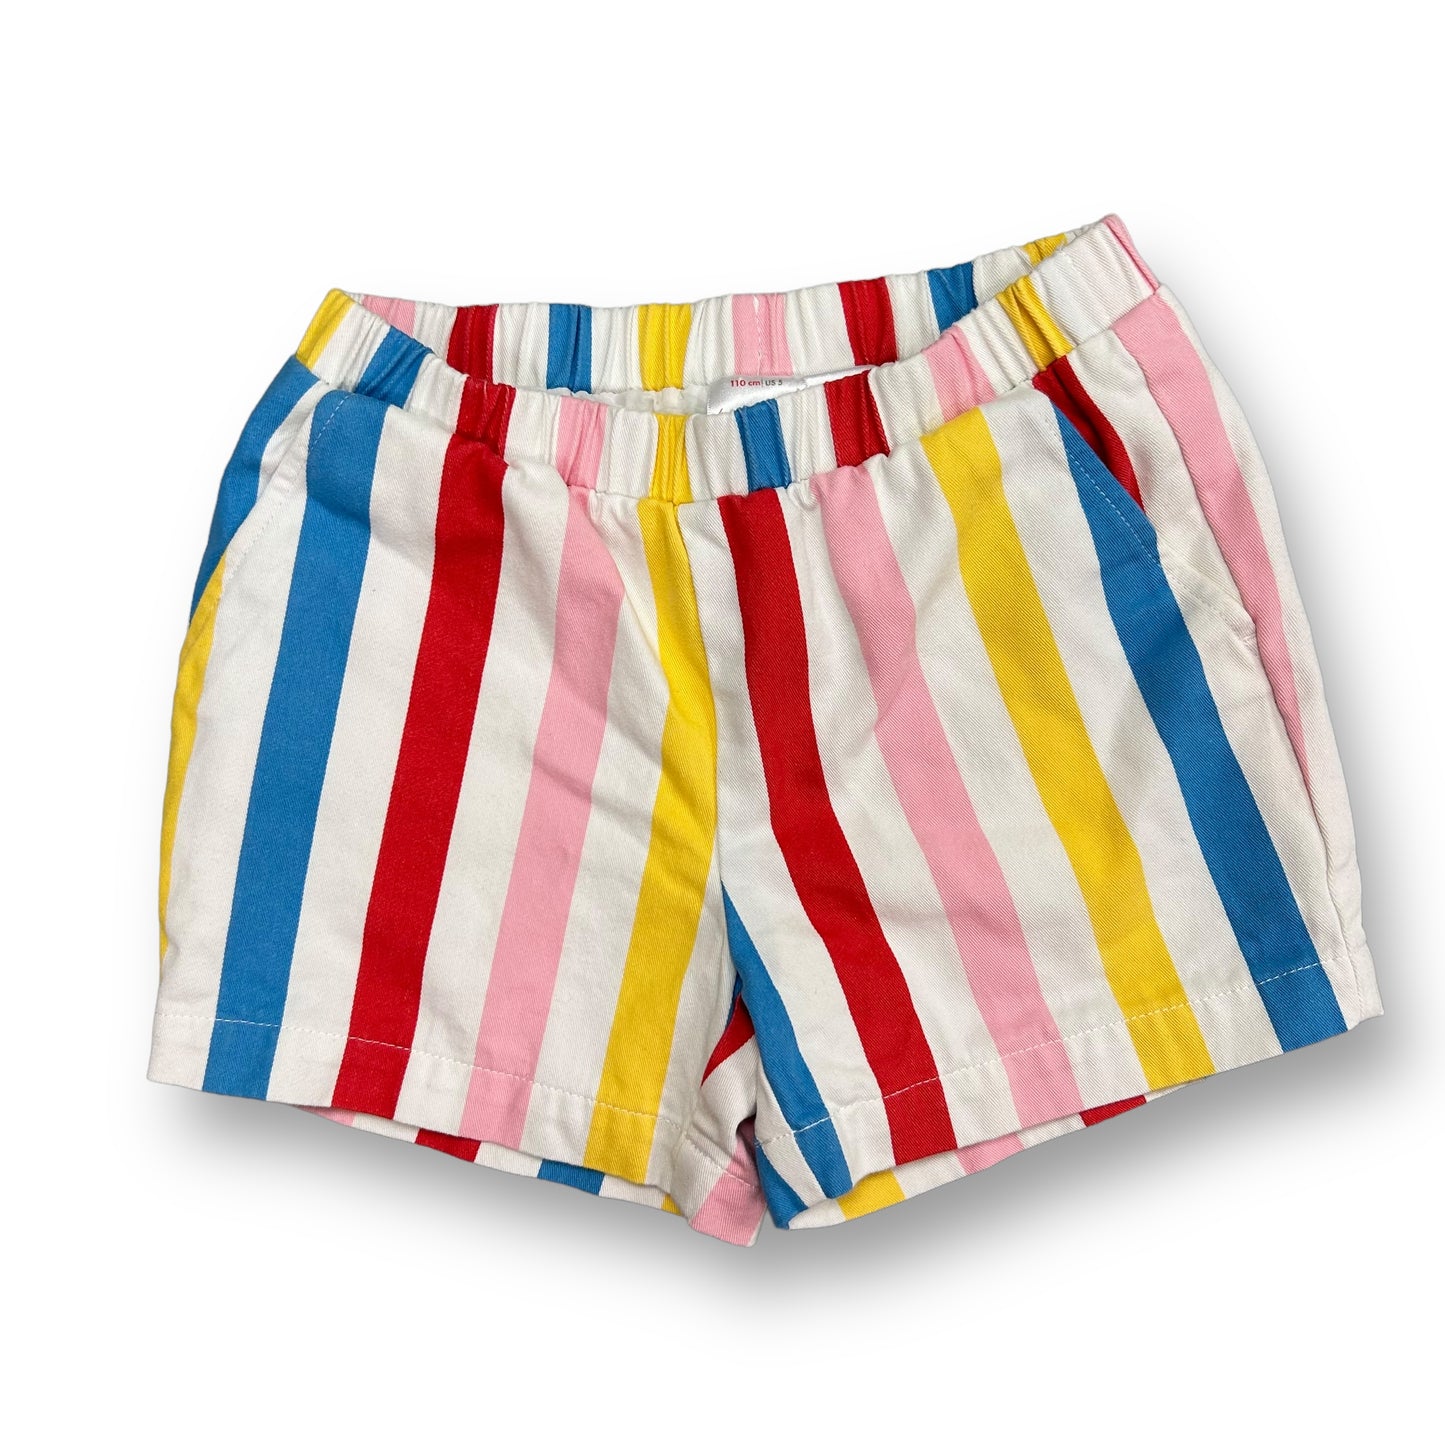 Girls Hanna Andersson Size 5 110 Multi-Color Striped Pull-On Shorts